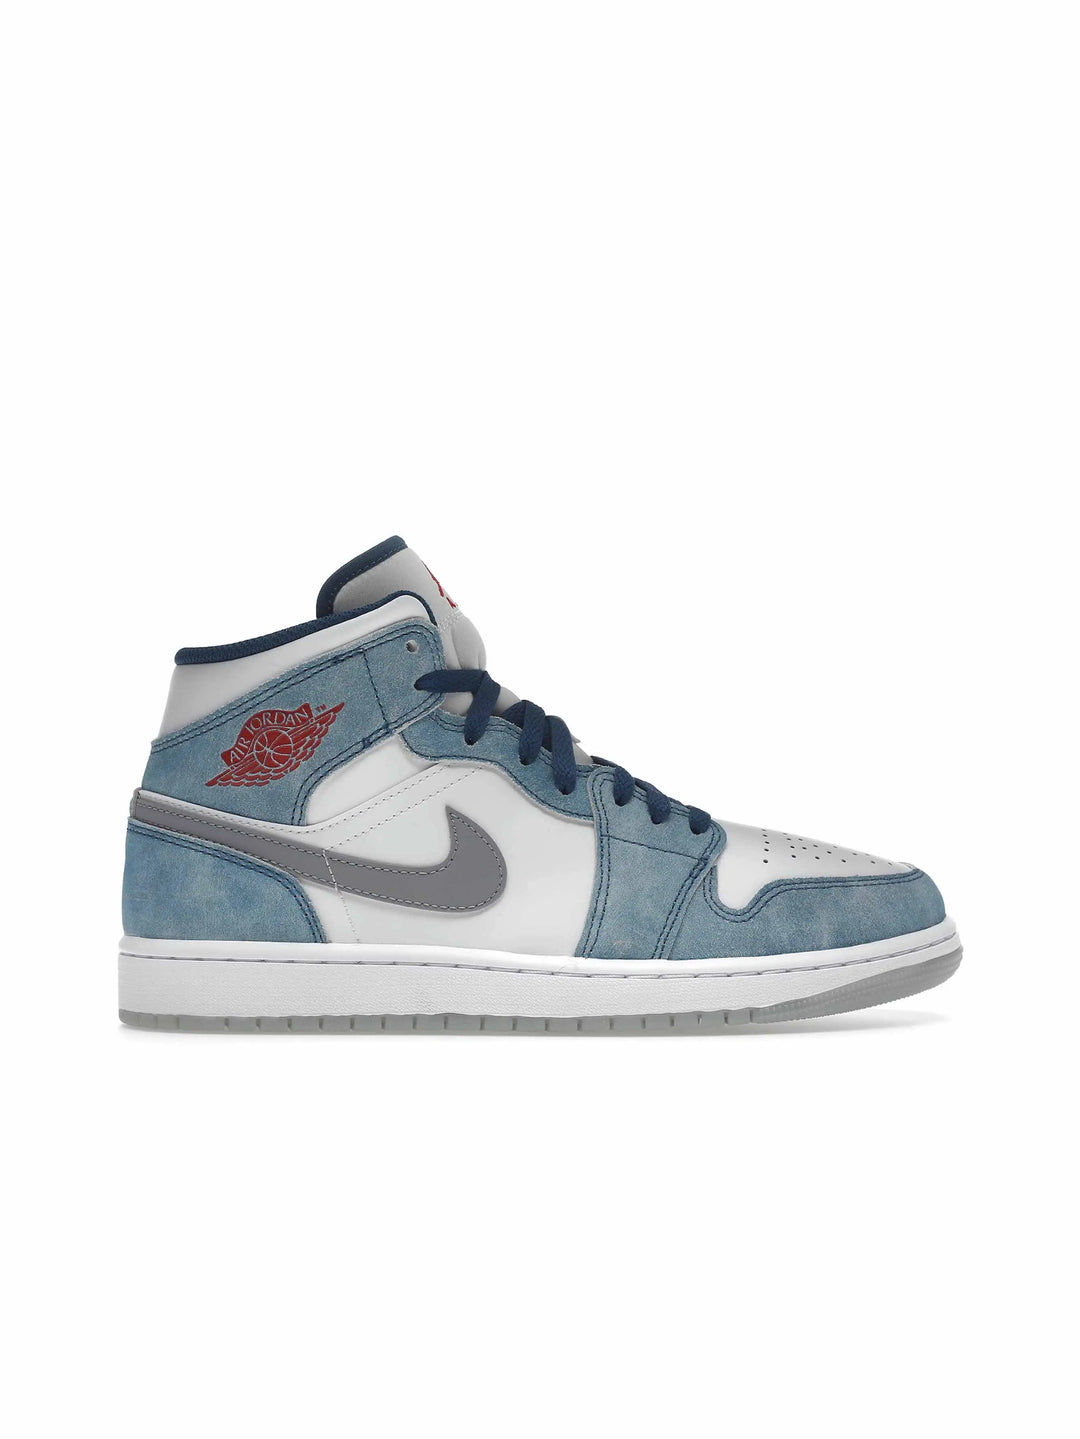 Nike Air Jordan 1 Mid French Blue Fire Red - Prior